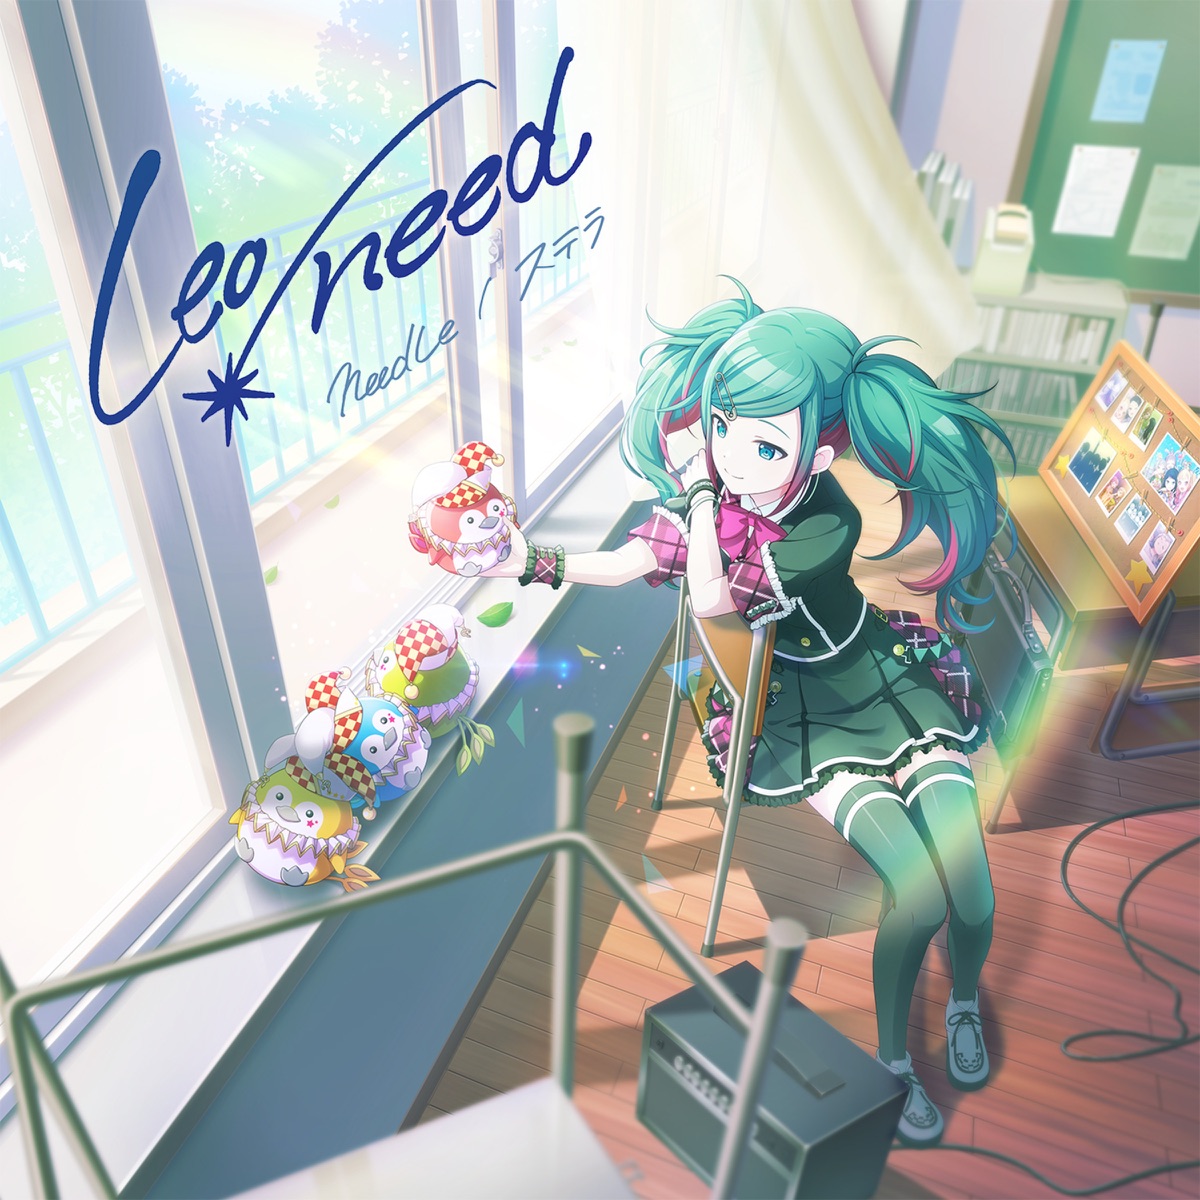 Cover for『Leo/need - Stella』from the release『needLe / Stella』